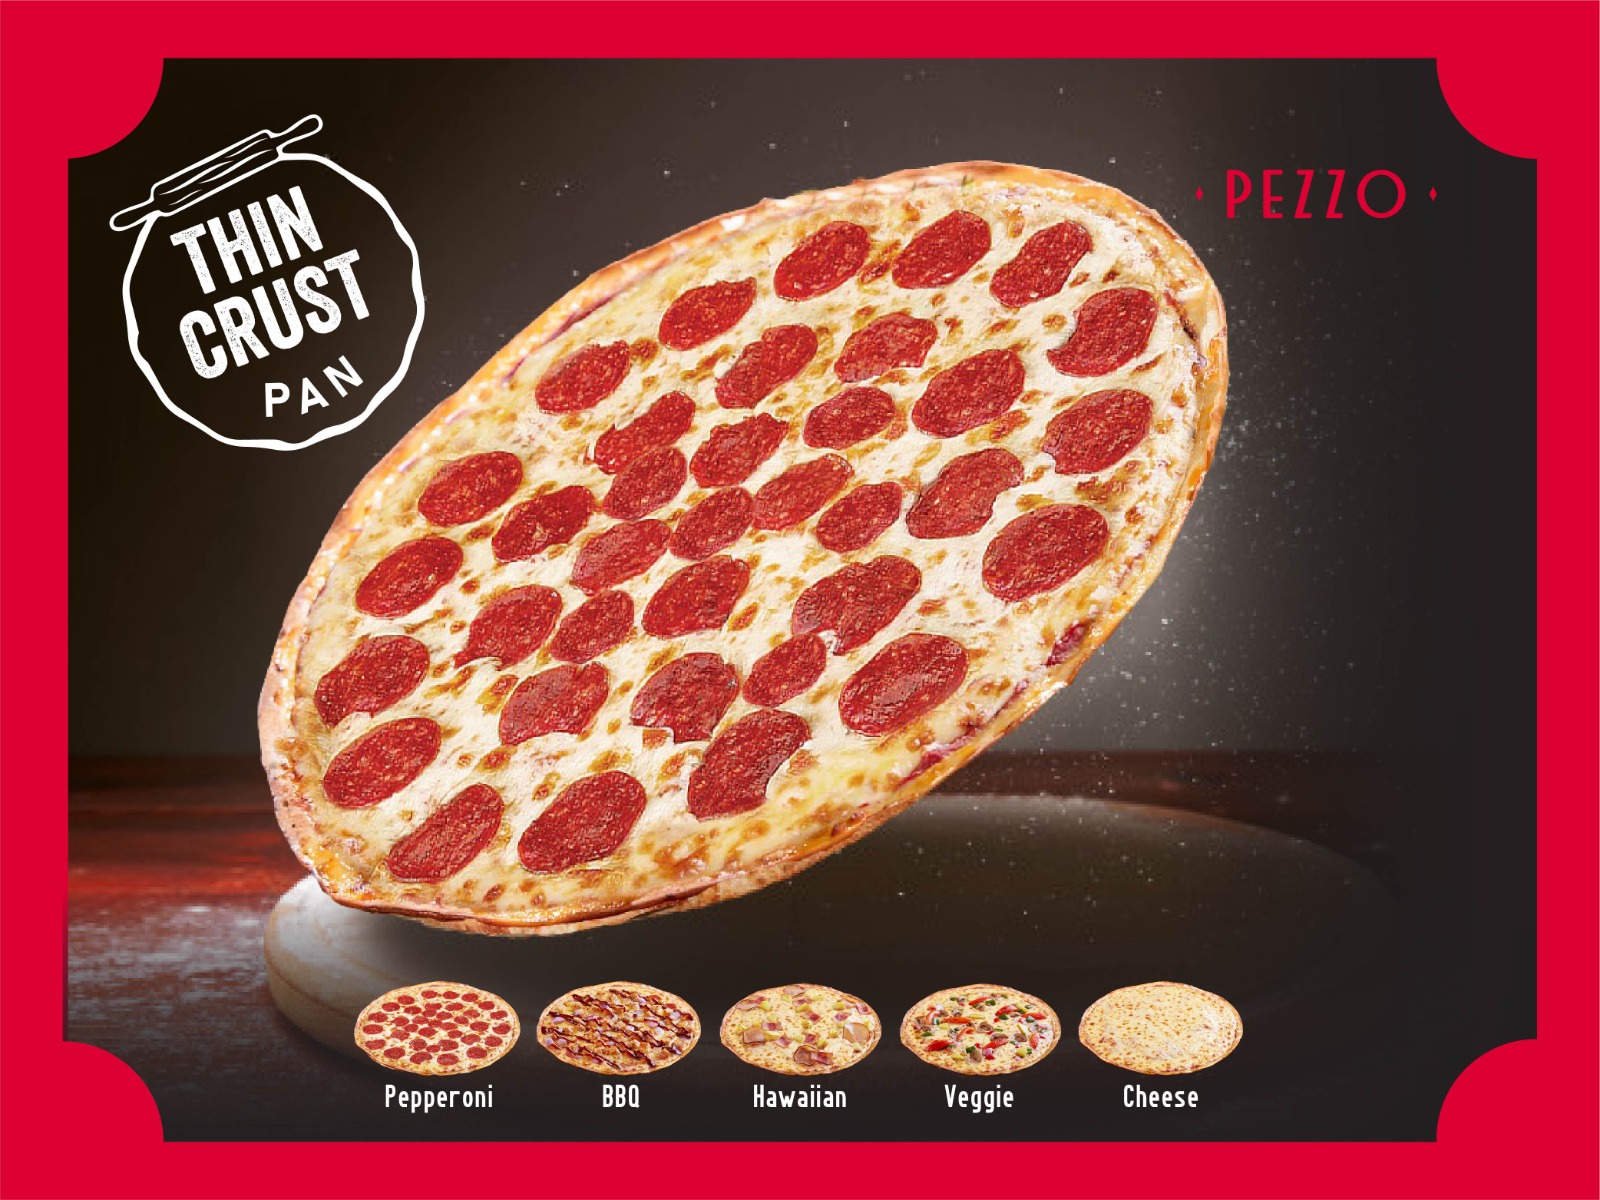 1 x 13” Thin Crust Pizza Pan - exclusive deal at Pezzo - Get Deals, Cashback and Rewards with ShopBack GO